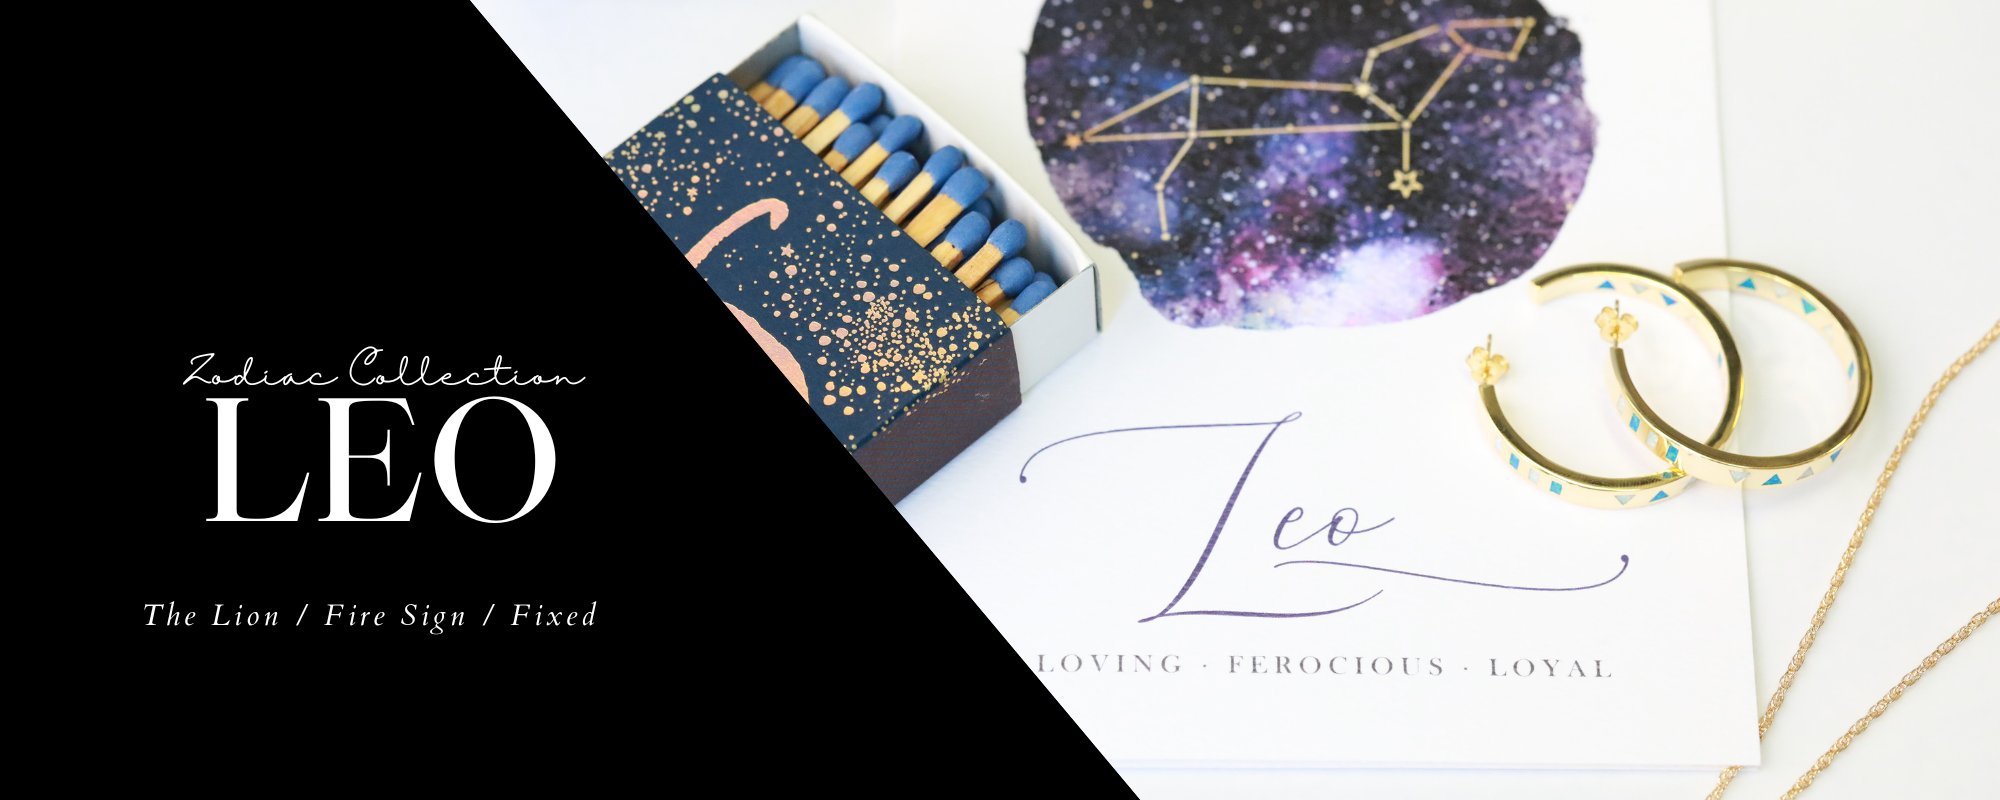 The leo zodiac sign gift collection image header